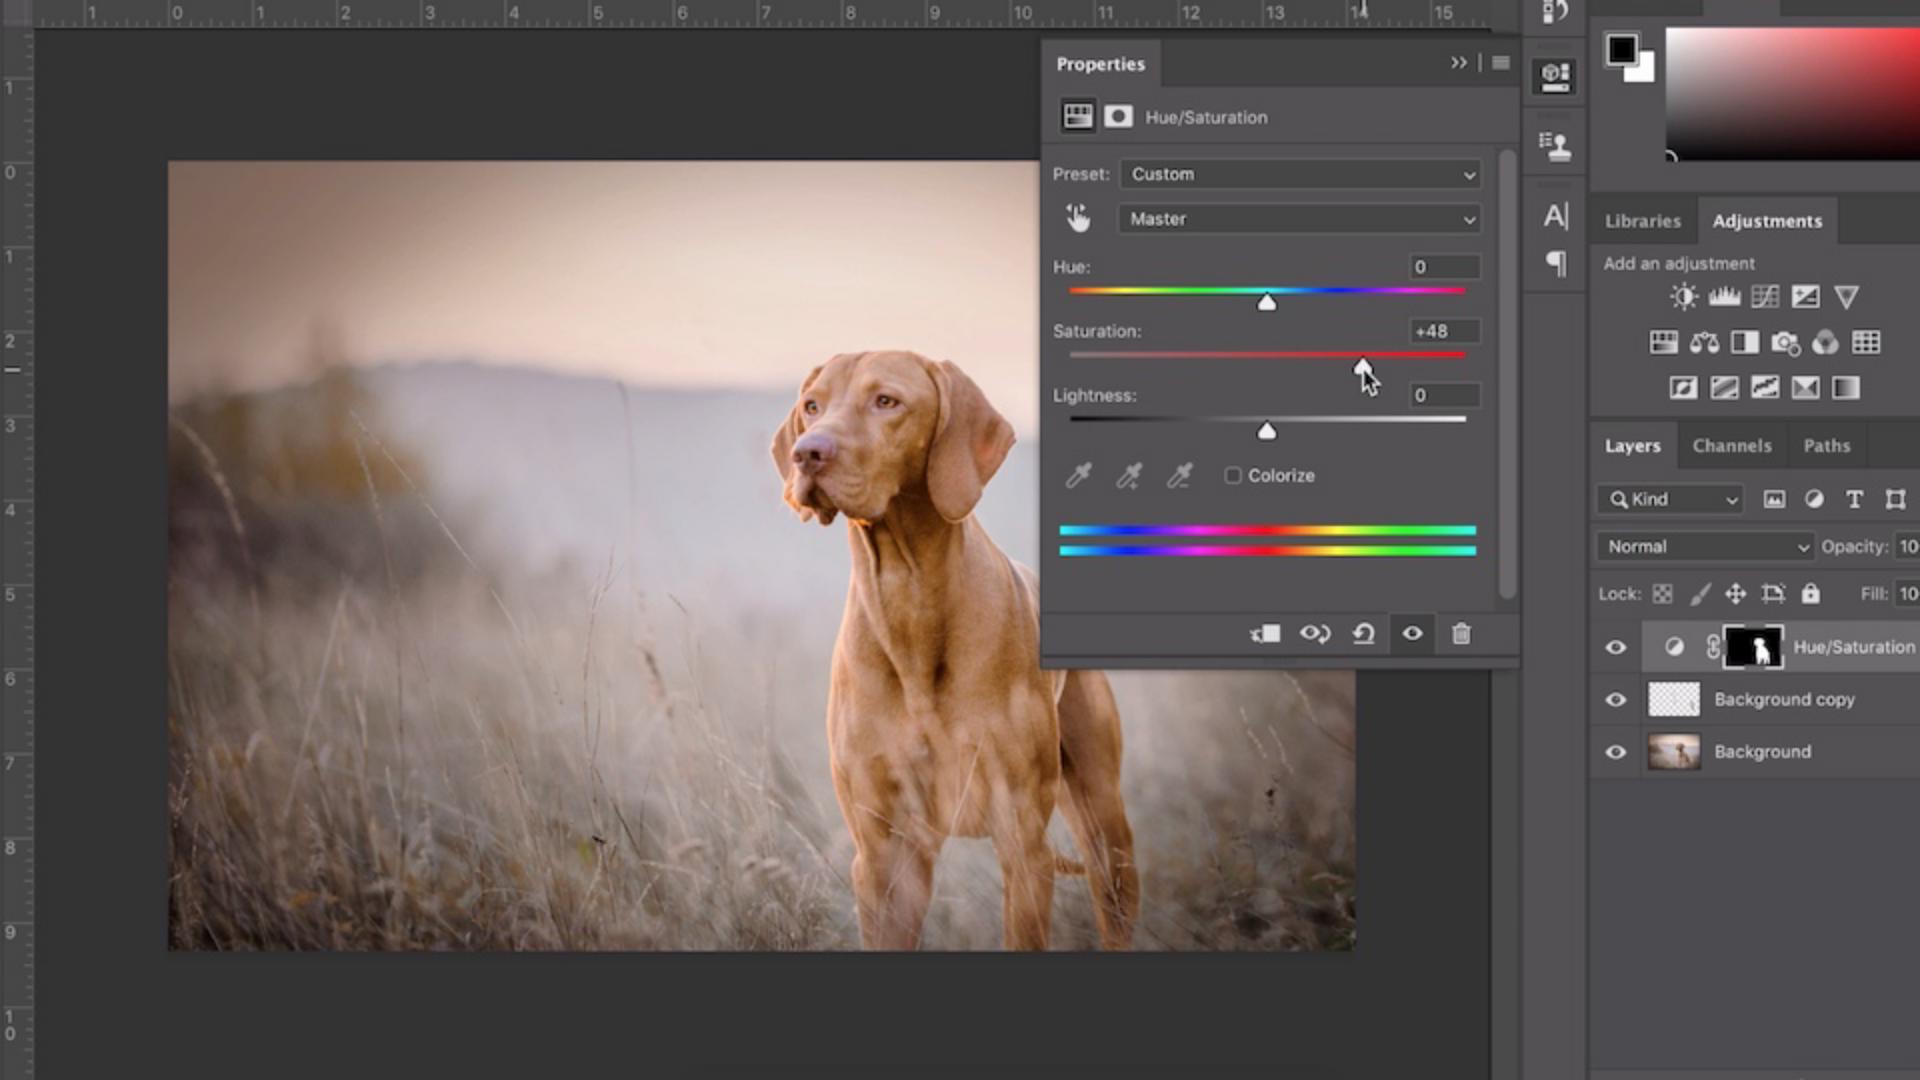 How to use Content-Aware Fill in Photoshop CC 2020